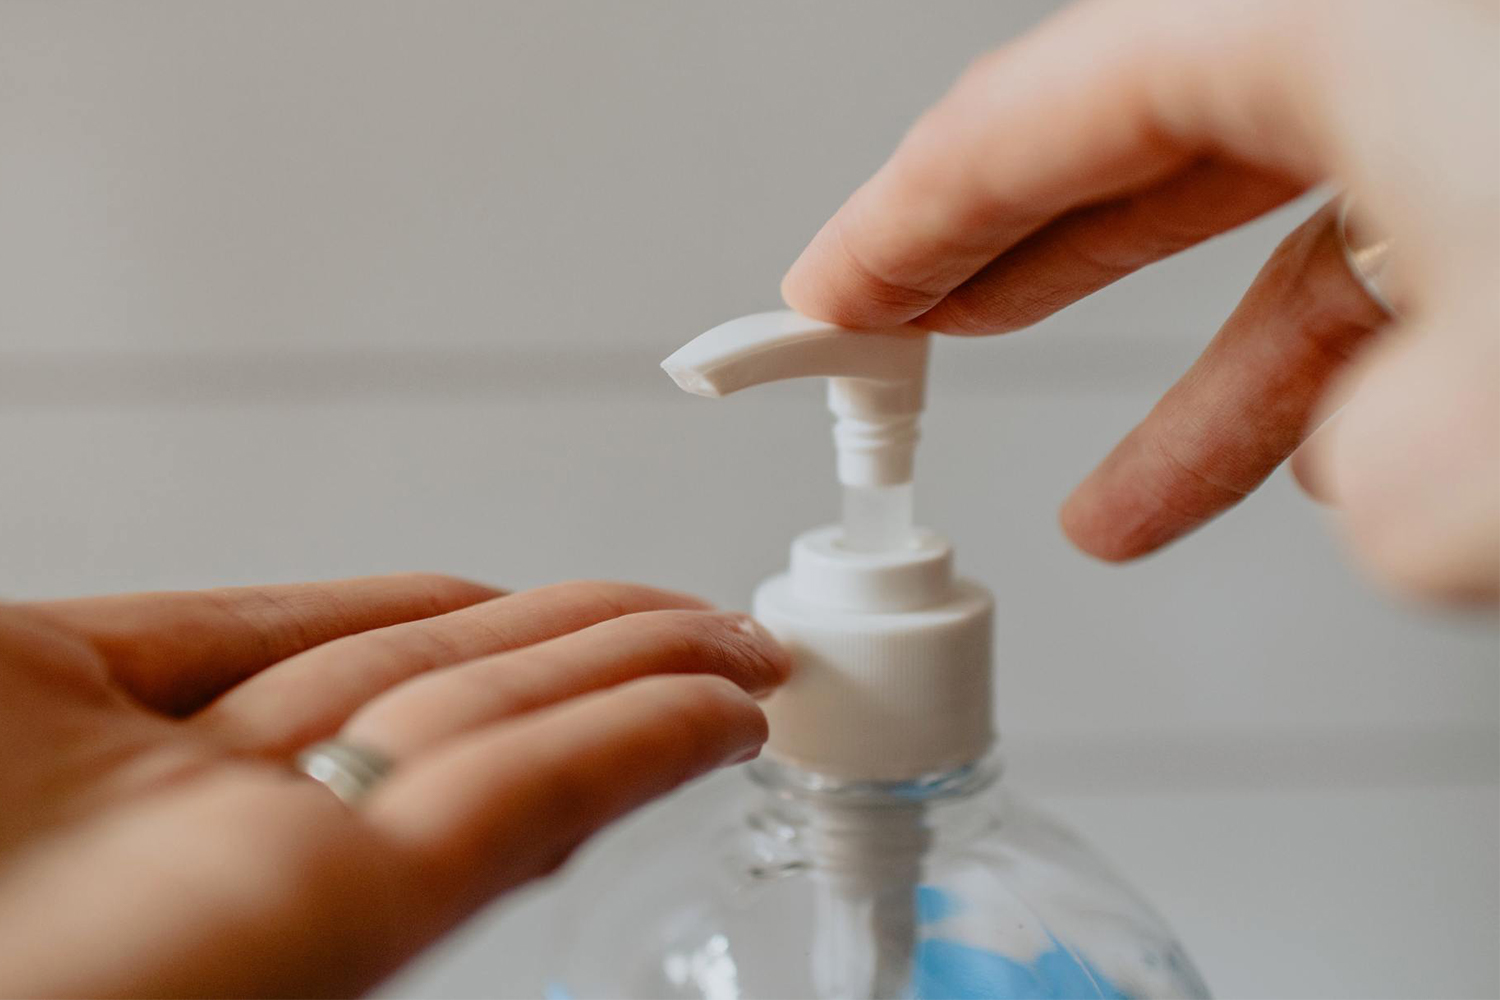 Runway Square - @lvmh (parent company of @louisvuitton, @dior and many  other luxury brands) has instructed its perfumes and cosmetics labs to  produce hand sanitizer for French health officials and authorities to